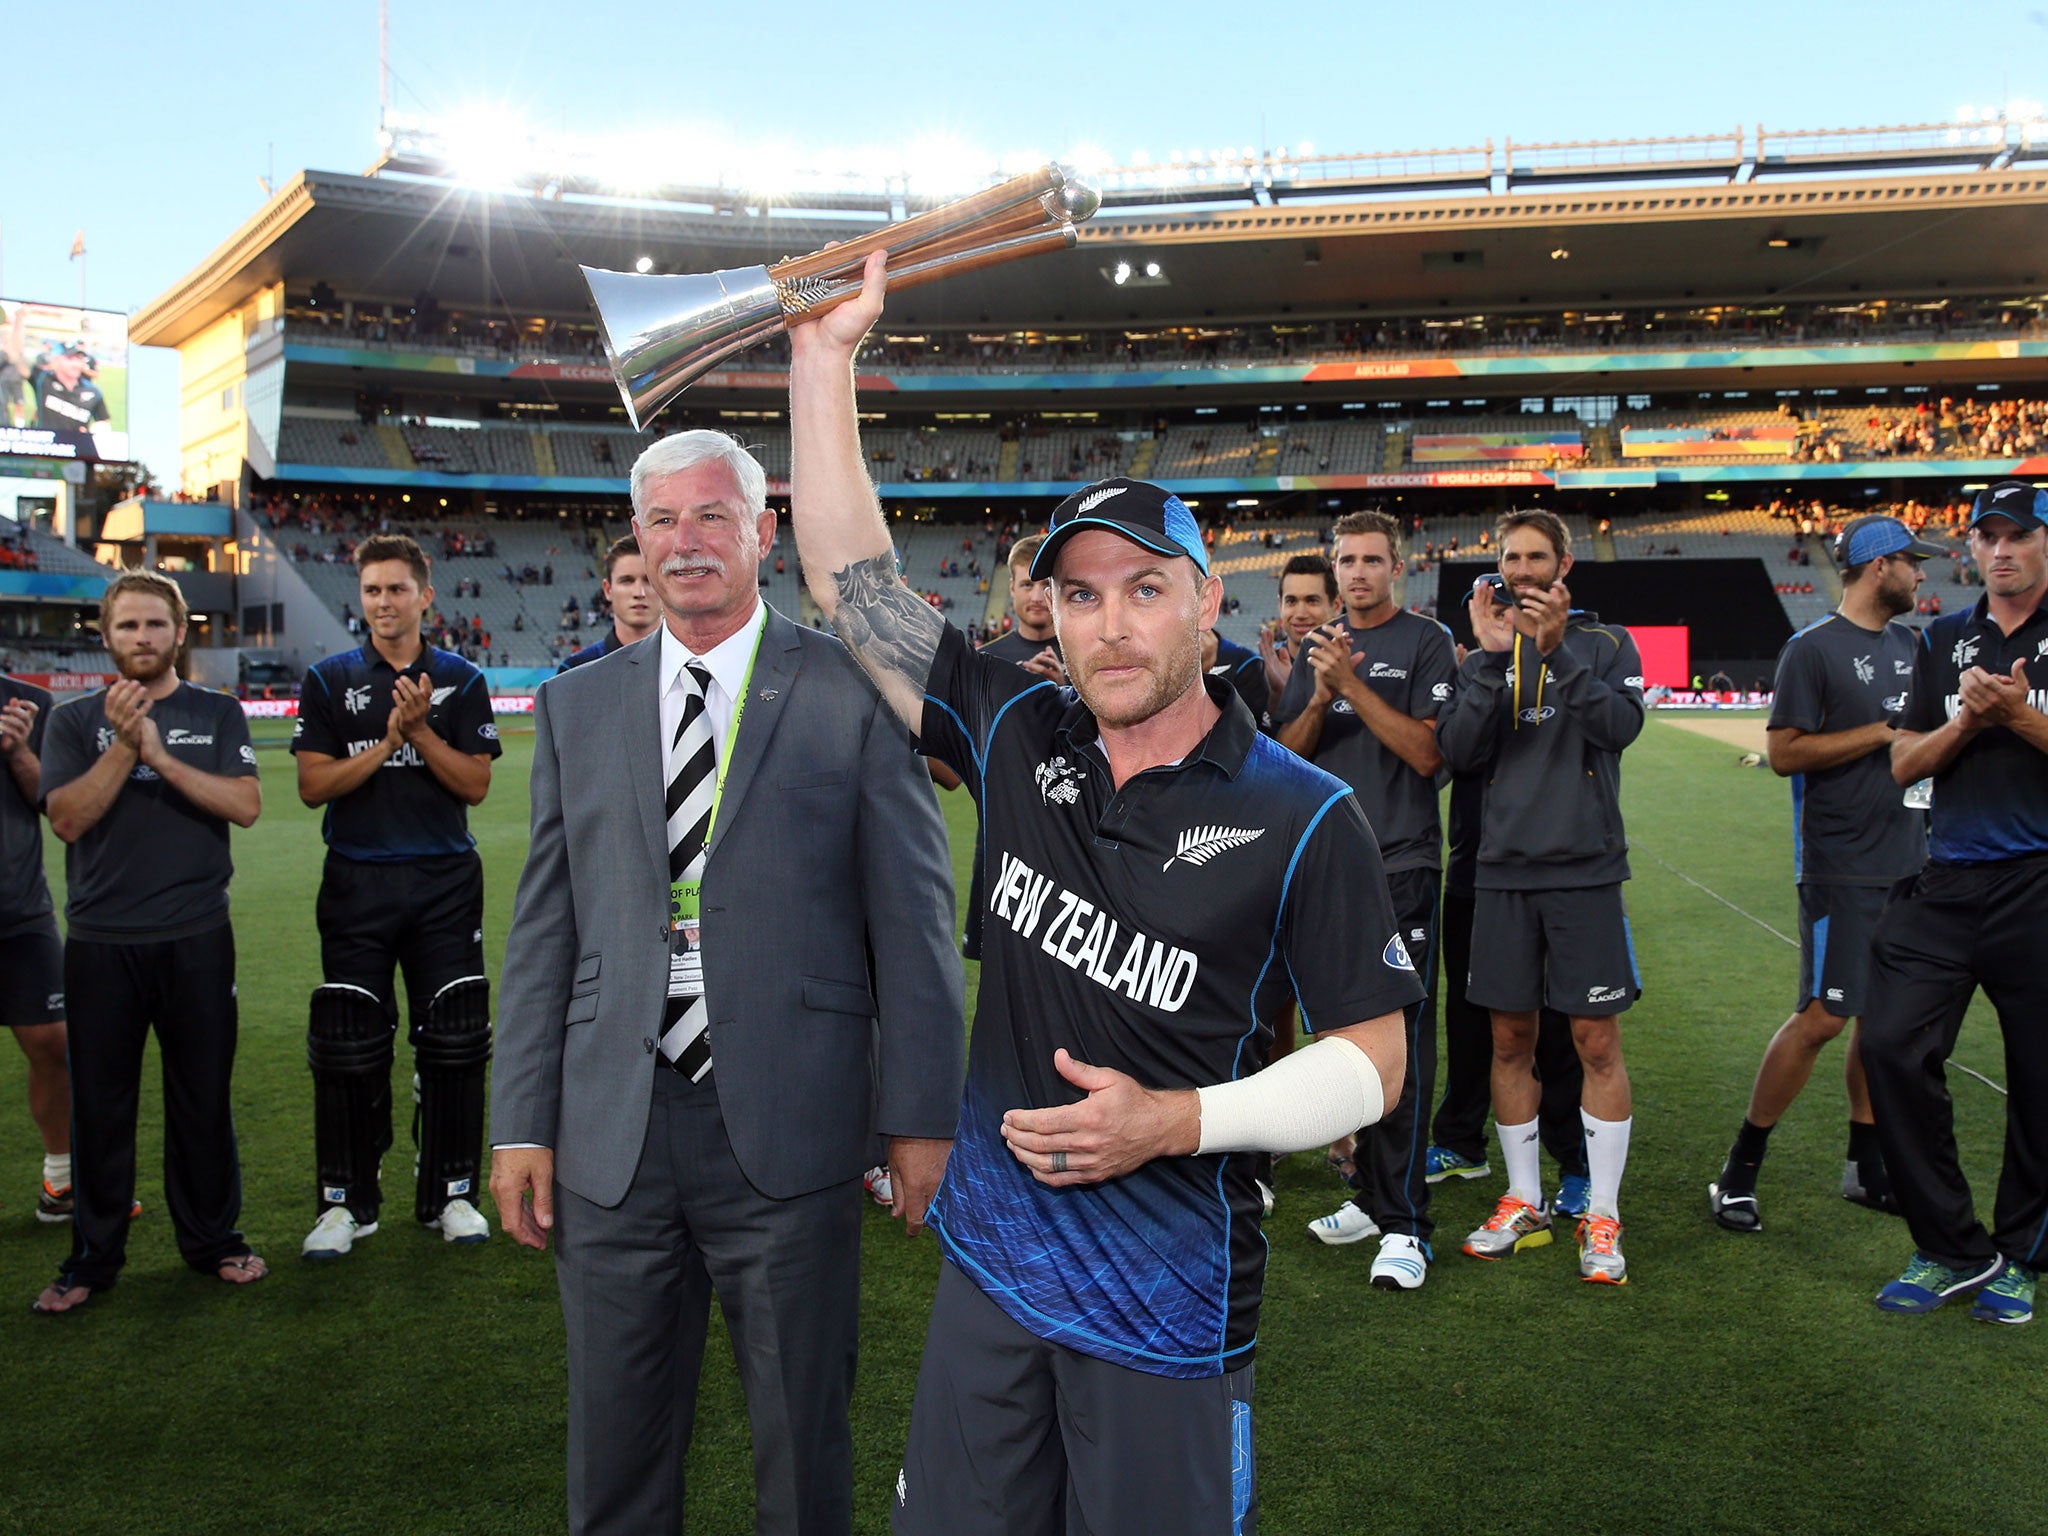 Brendan McCullum lifts the Chappell-Hadlee Trophy after New Zealand defeated Australia